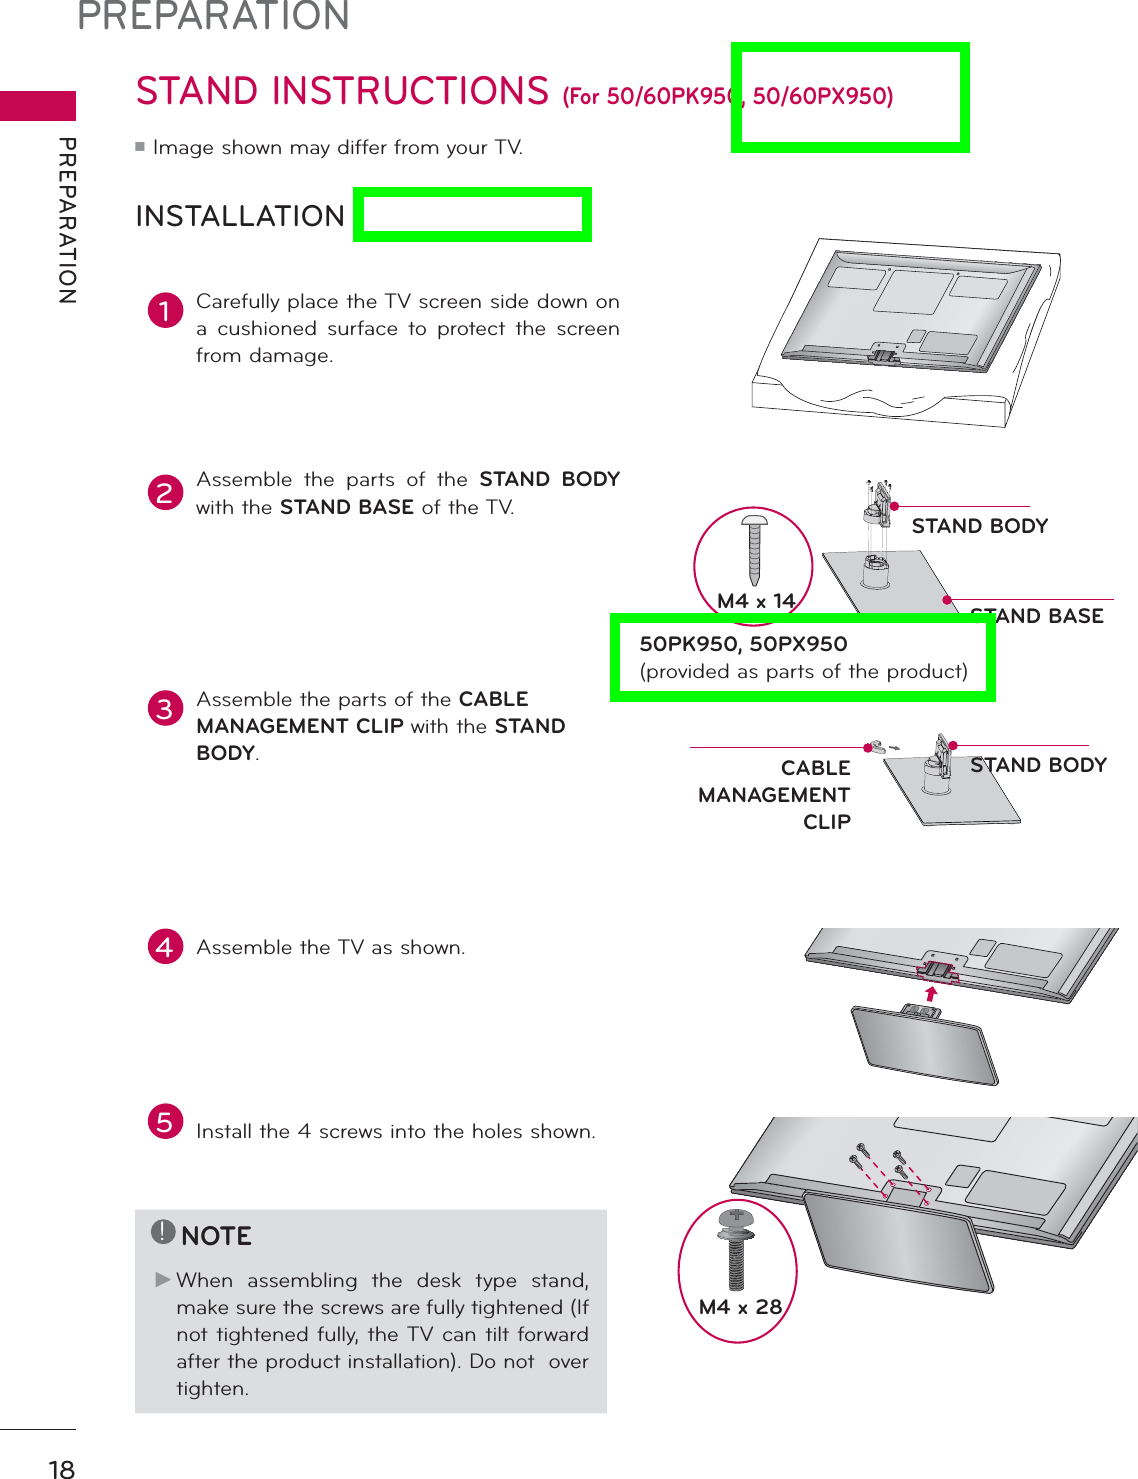 PREPARATIONPREPARATION18STAND INSTRUCTIONS (For 50/60PK950, 50/60PX950)ᯫImage shown may differ from your TV.INSTALLATION!NOTEŹWhen assembling the desk type stand, make sure the screws are fully tightened (If not tightened fully, the TV can tilt forward after the product installation). Do not  over tighten.1Carefully place the TV screen side down on a cushioned surface to protect the screen from damage.2Assemble the parts of the STAND BODYwith the STAND BASE of the TV.3Assemble the parts of the CABLEMANAGEMENT CLIP with the STAND BODY.5Install the 4 screws into the holes shown.M4 x 284Assemble the TV as shown.STAND BASESTAND BODYSTAND BODYCABLEMANAGEMENT CLIPM4 x 1450PK950, 50PX950(provided as parts of the product)